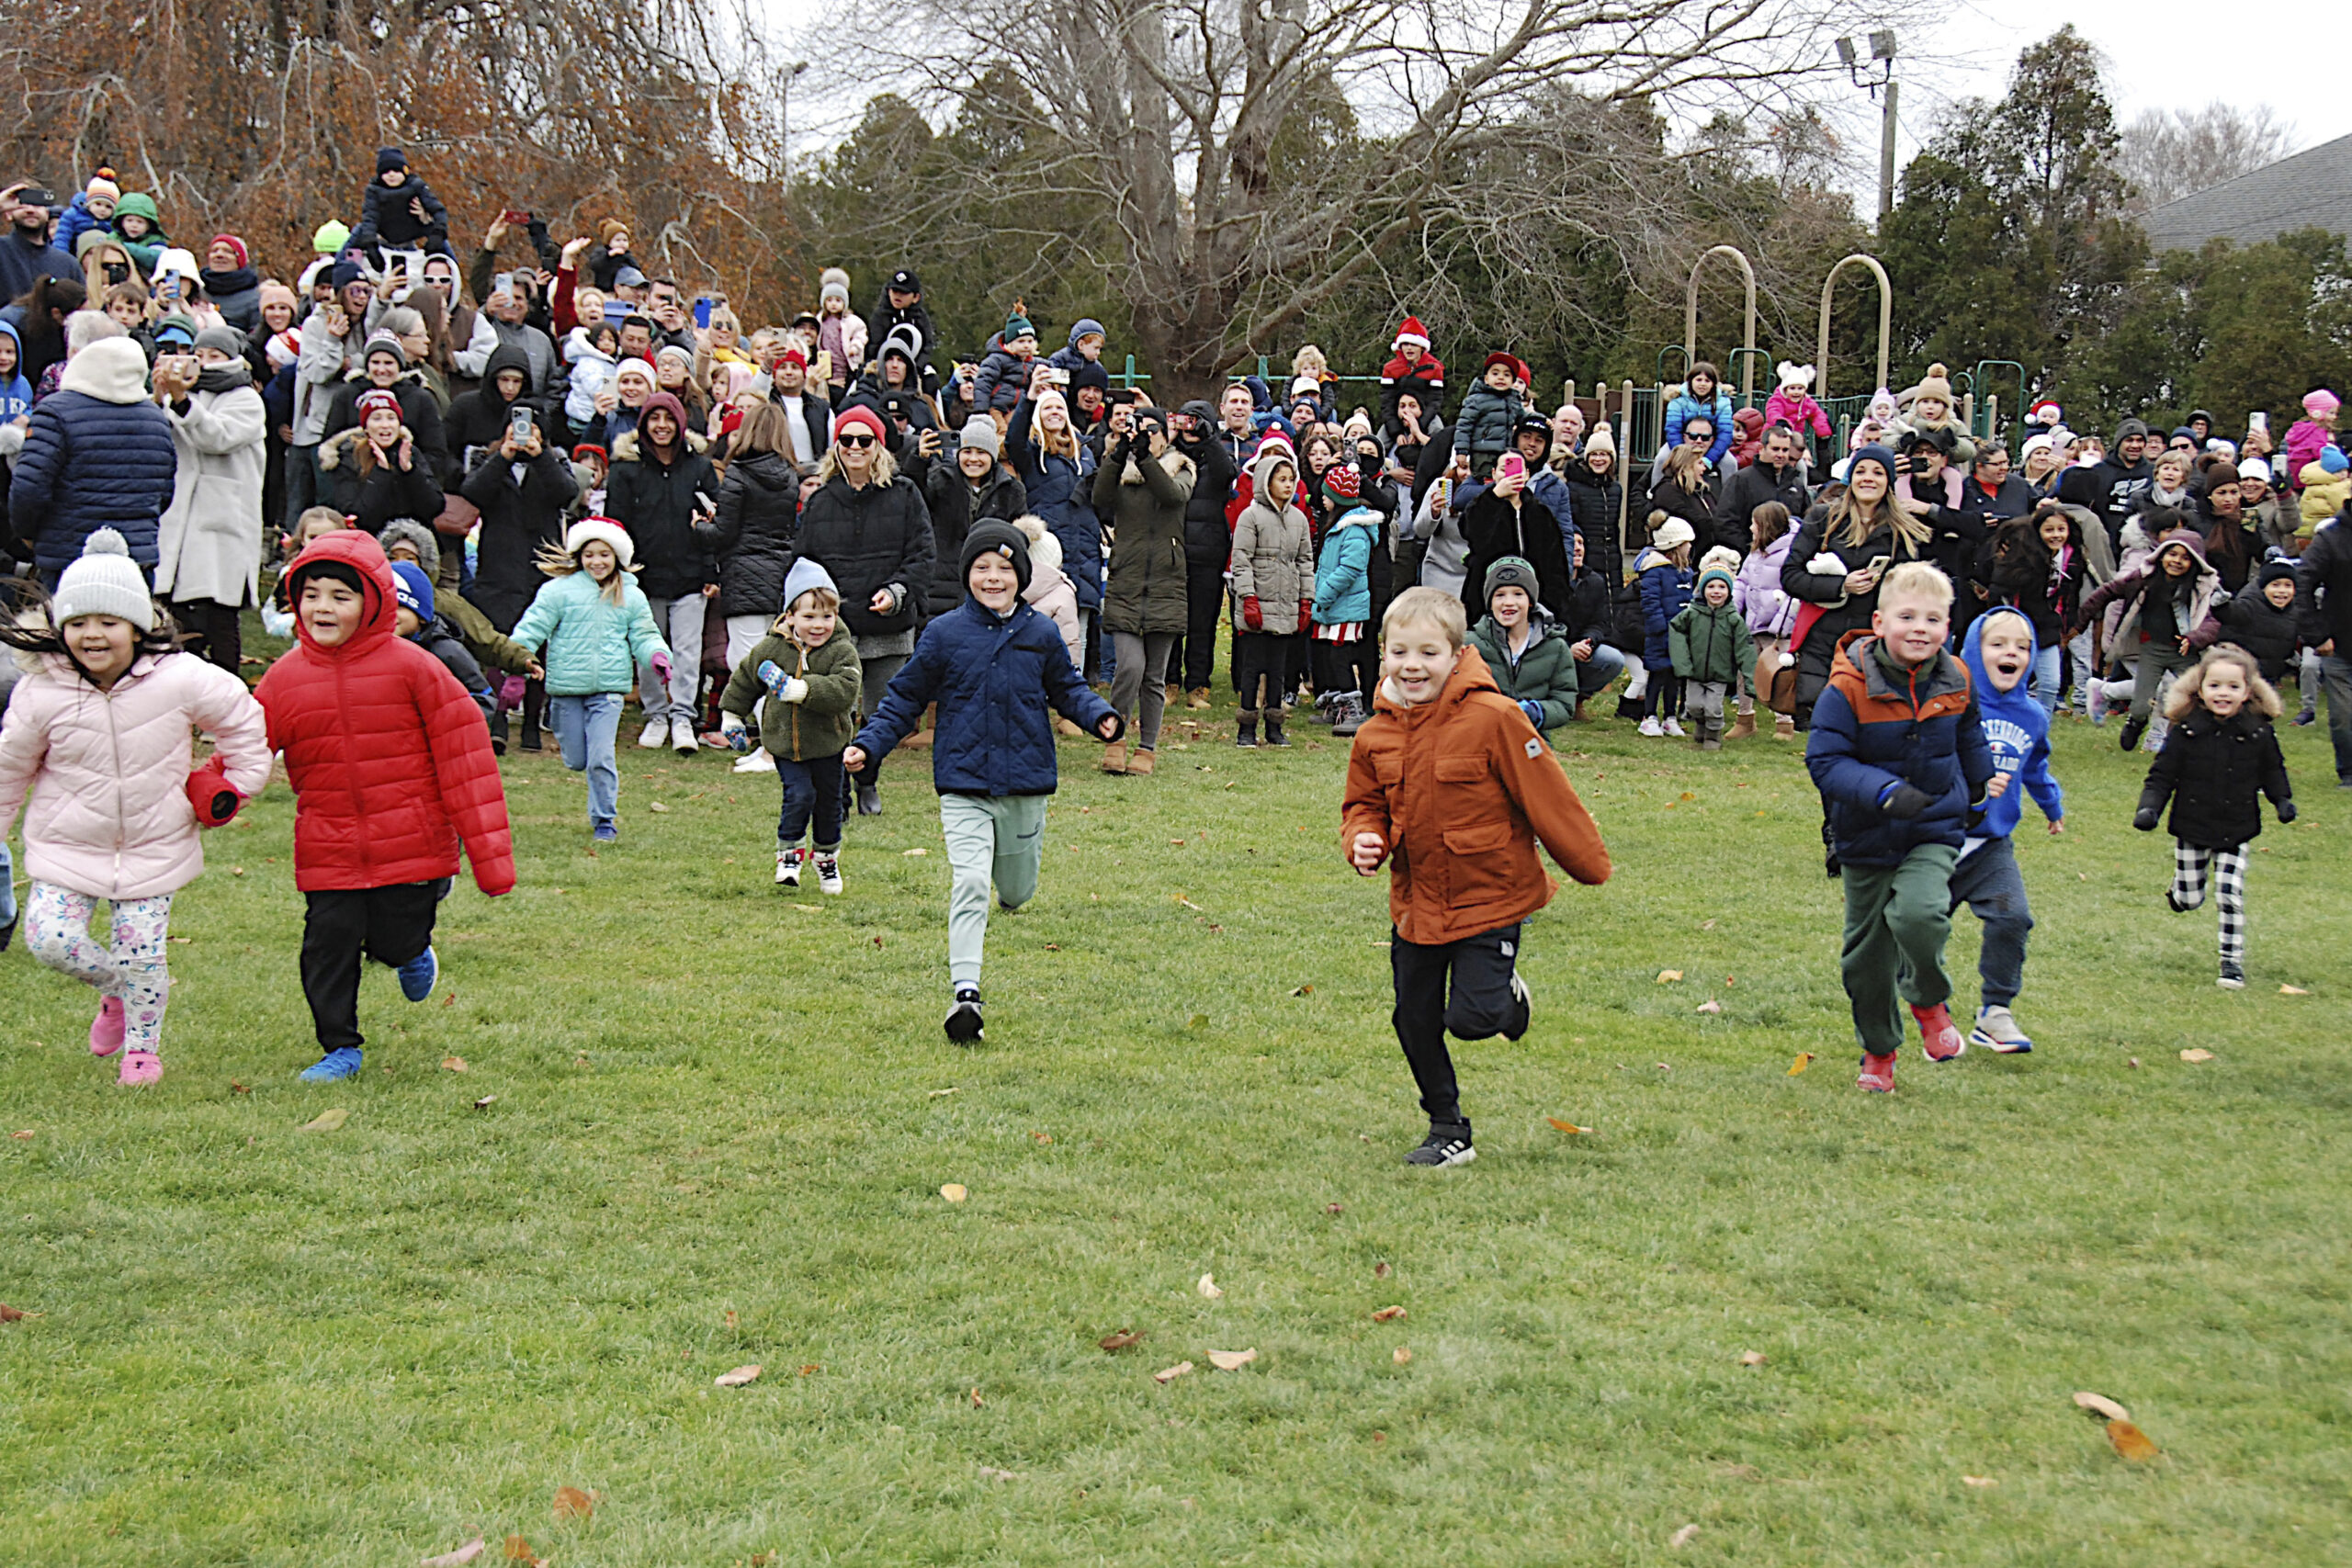 Kids rush toward Santa in Herrick Park in East Hampton on Saturday afternoon after he arrives via a Suffolk County Police helicopter.  KYRIL BROMLEY